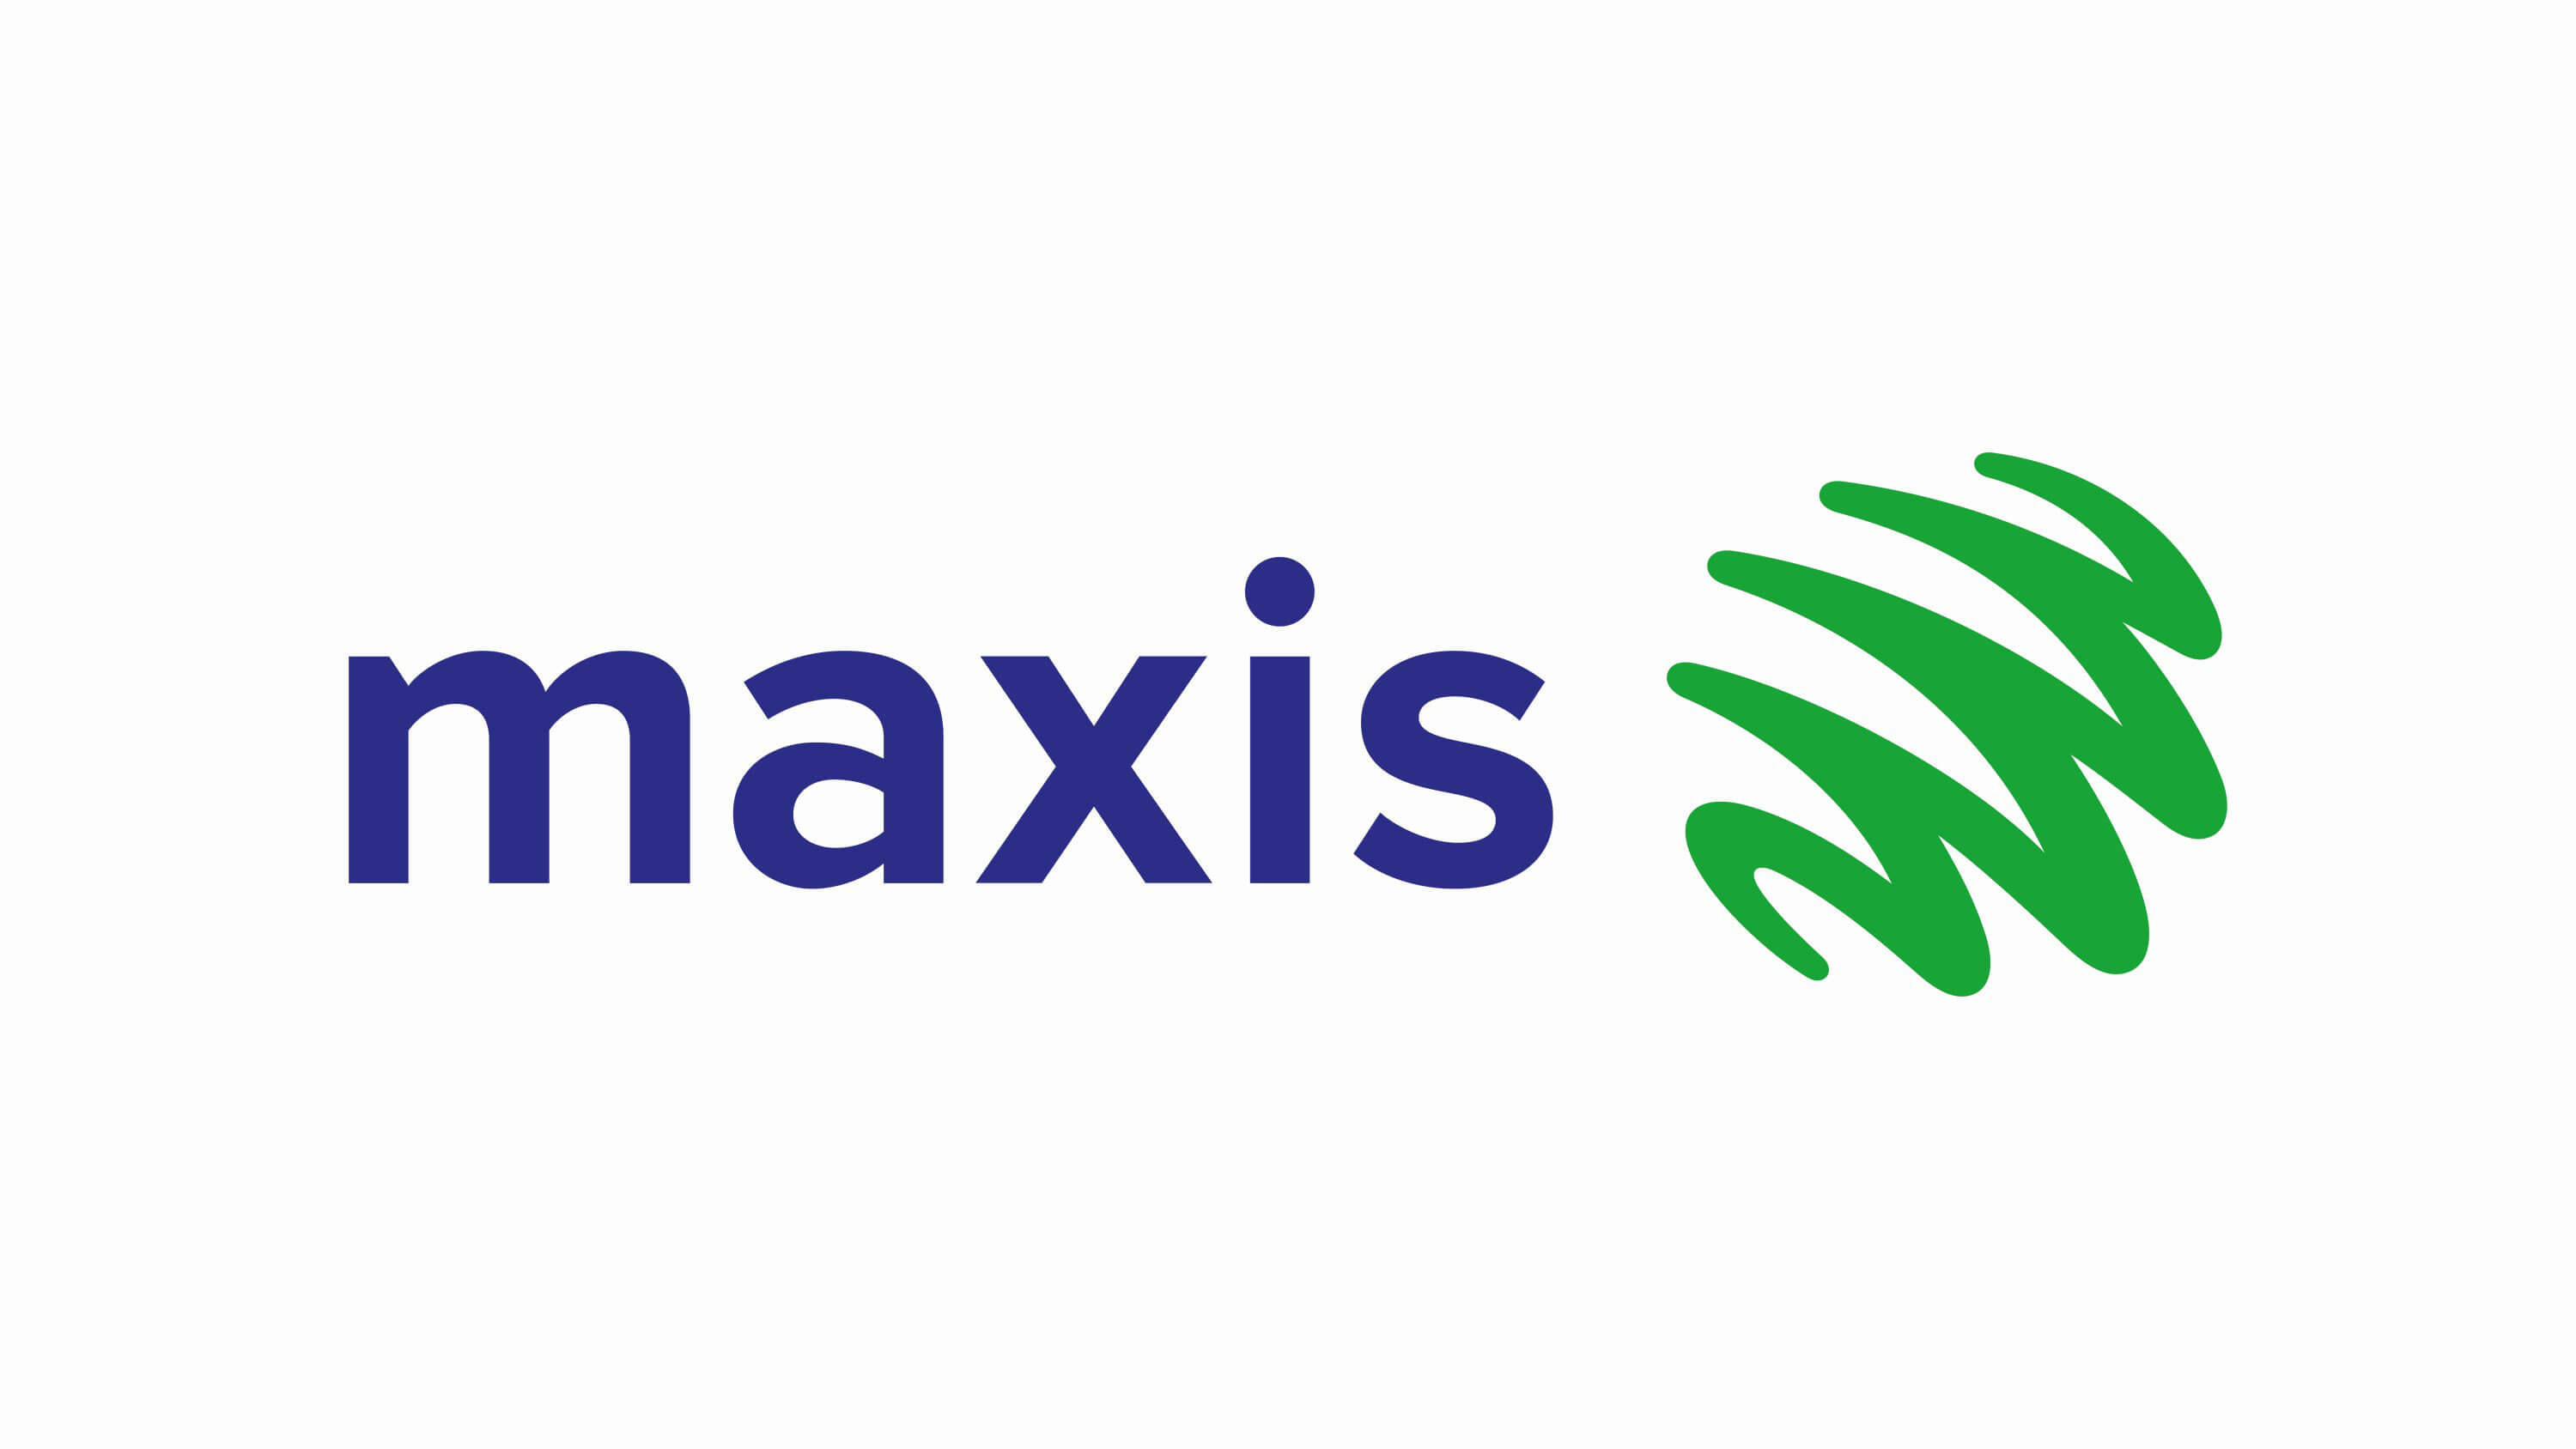 Maxis records solid Q3 performance, delivering growth across all segments